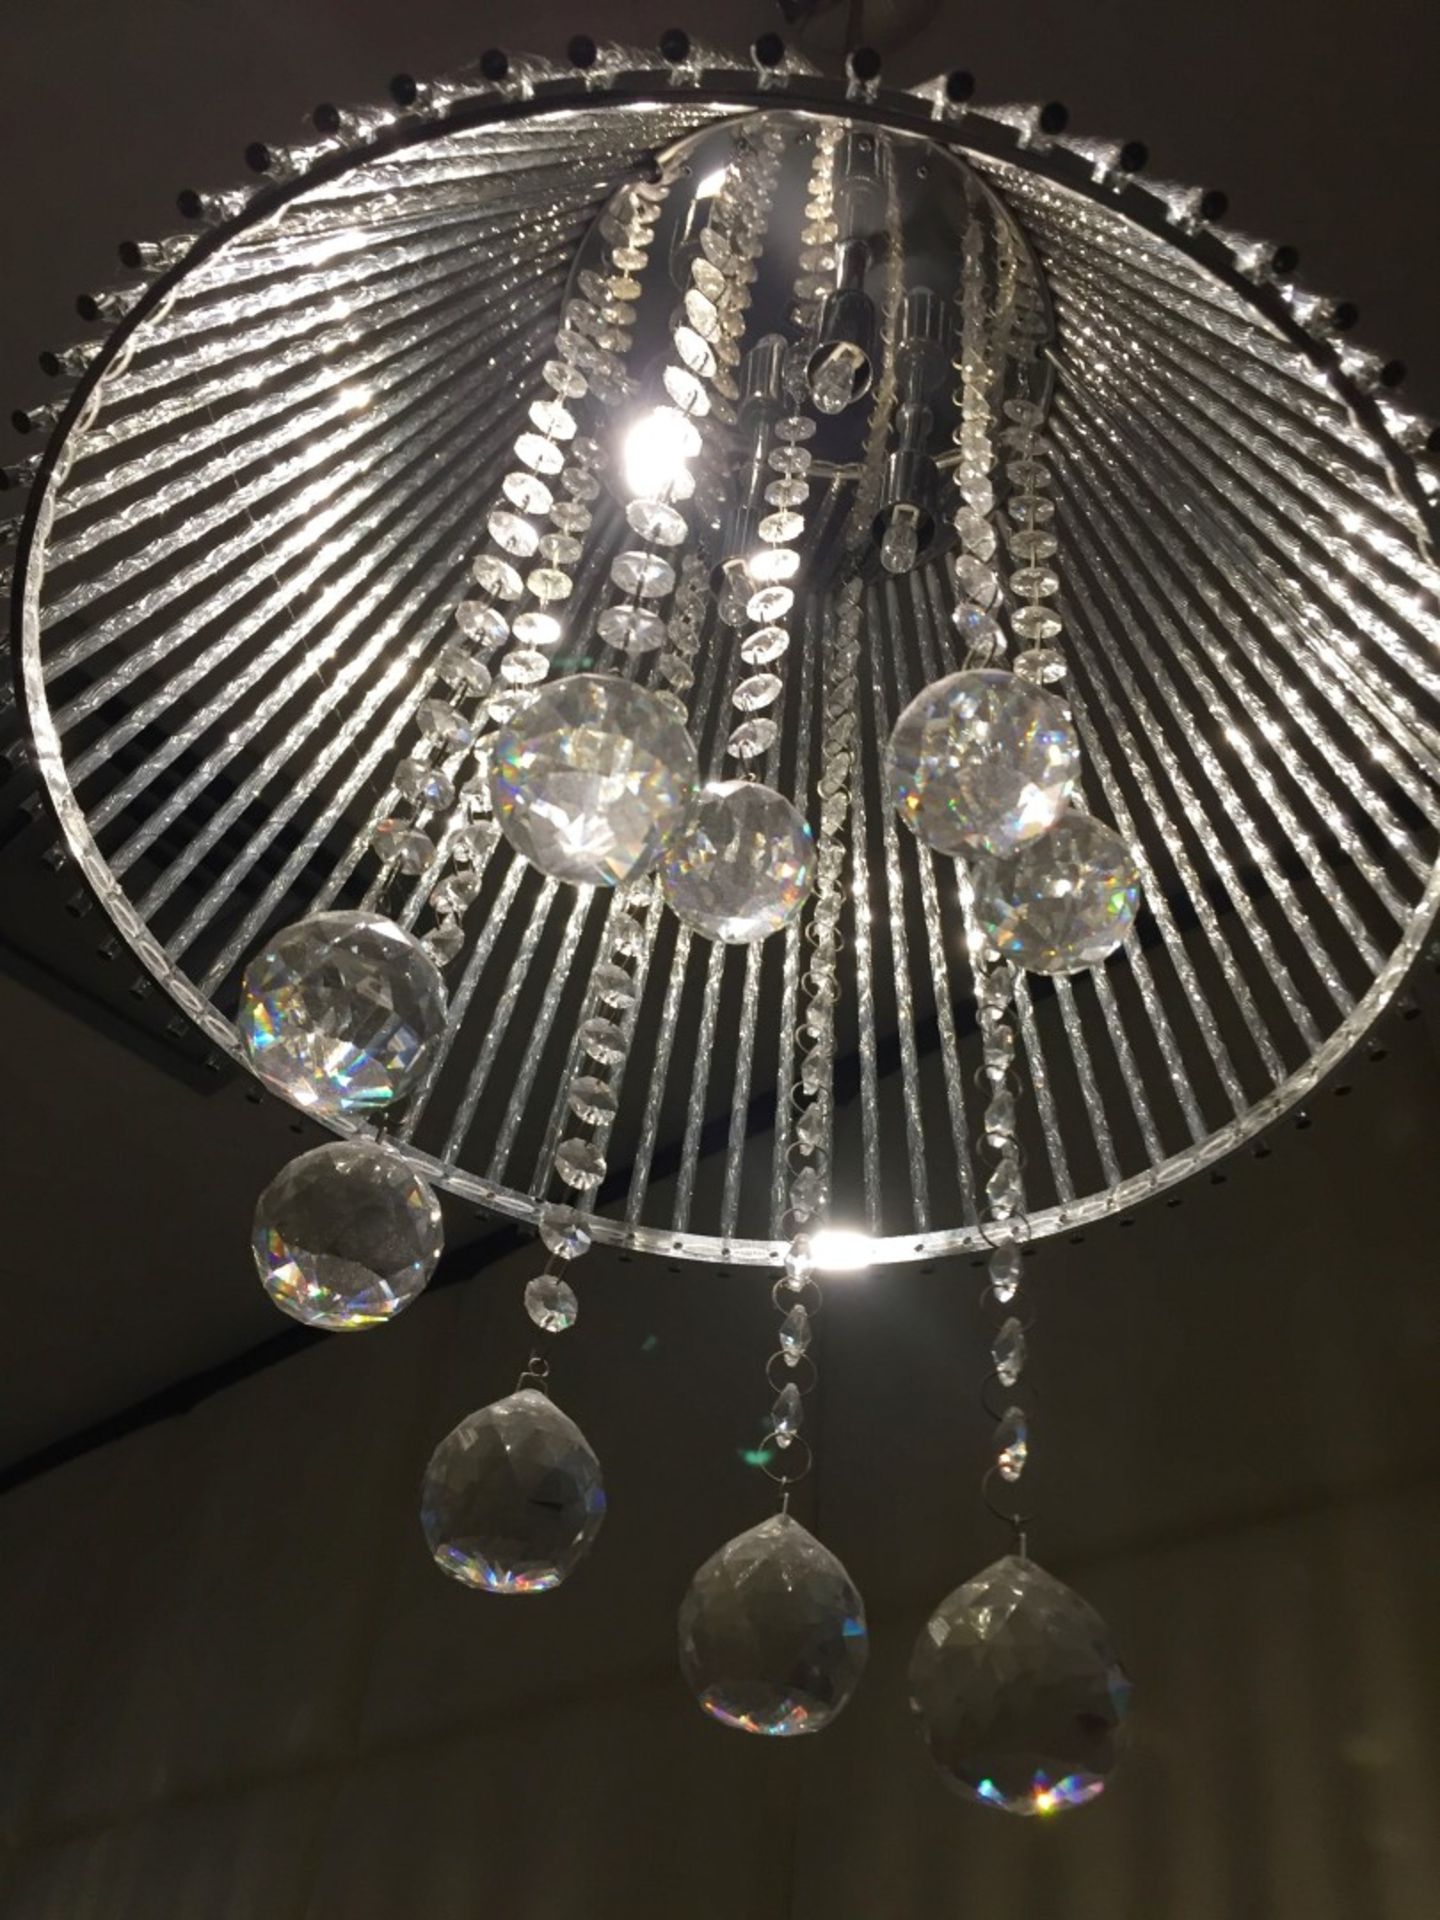 2 x Contemporary Pendant Ceiling Lights With Faux Crystal Droplets - CL188 - Ref GF1 - Location: - Image 3 of 4